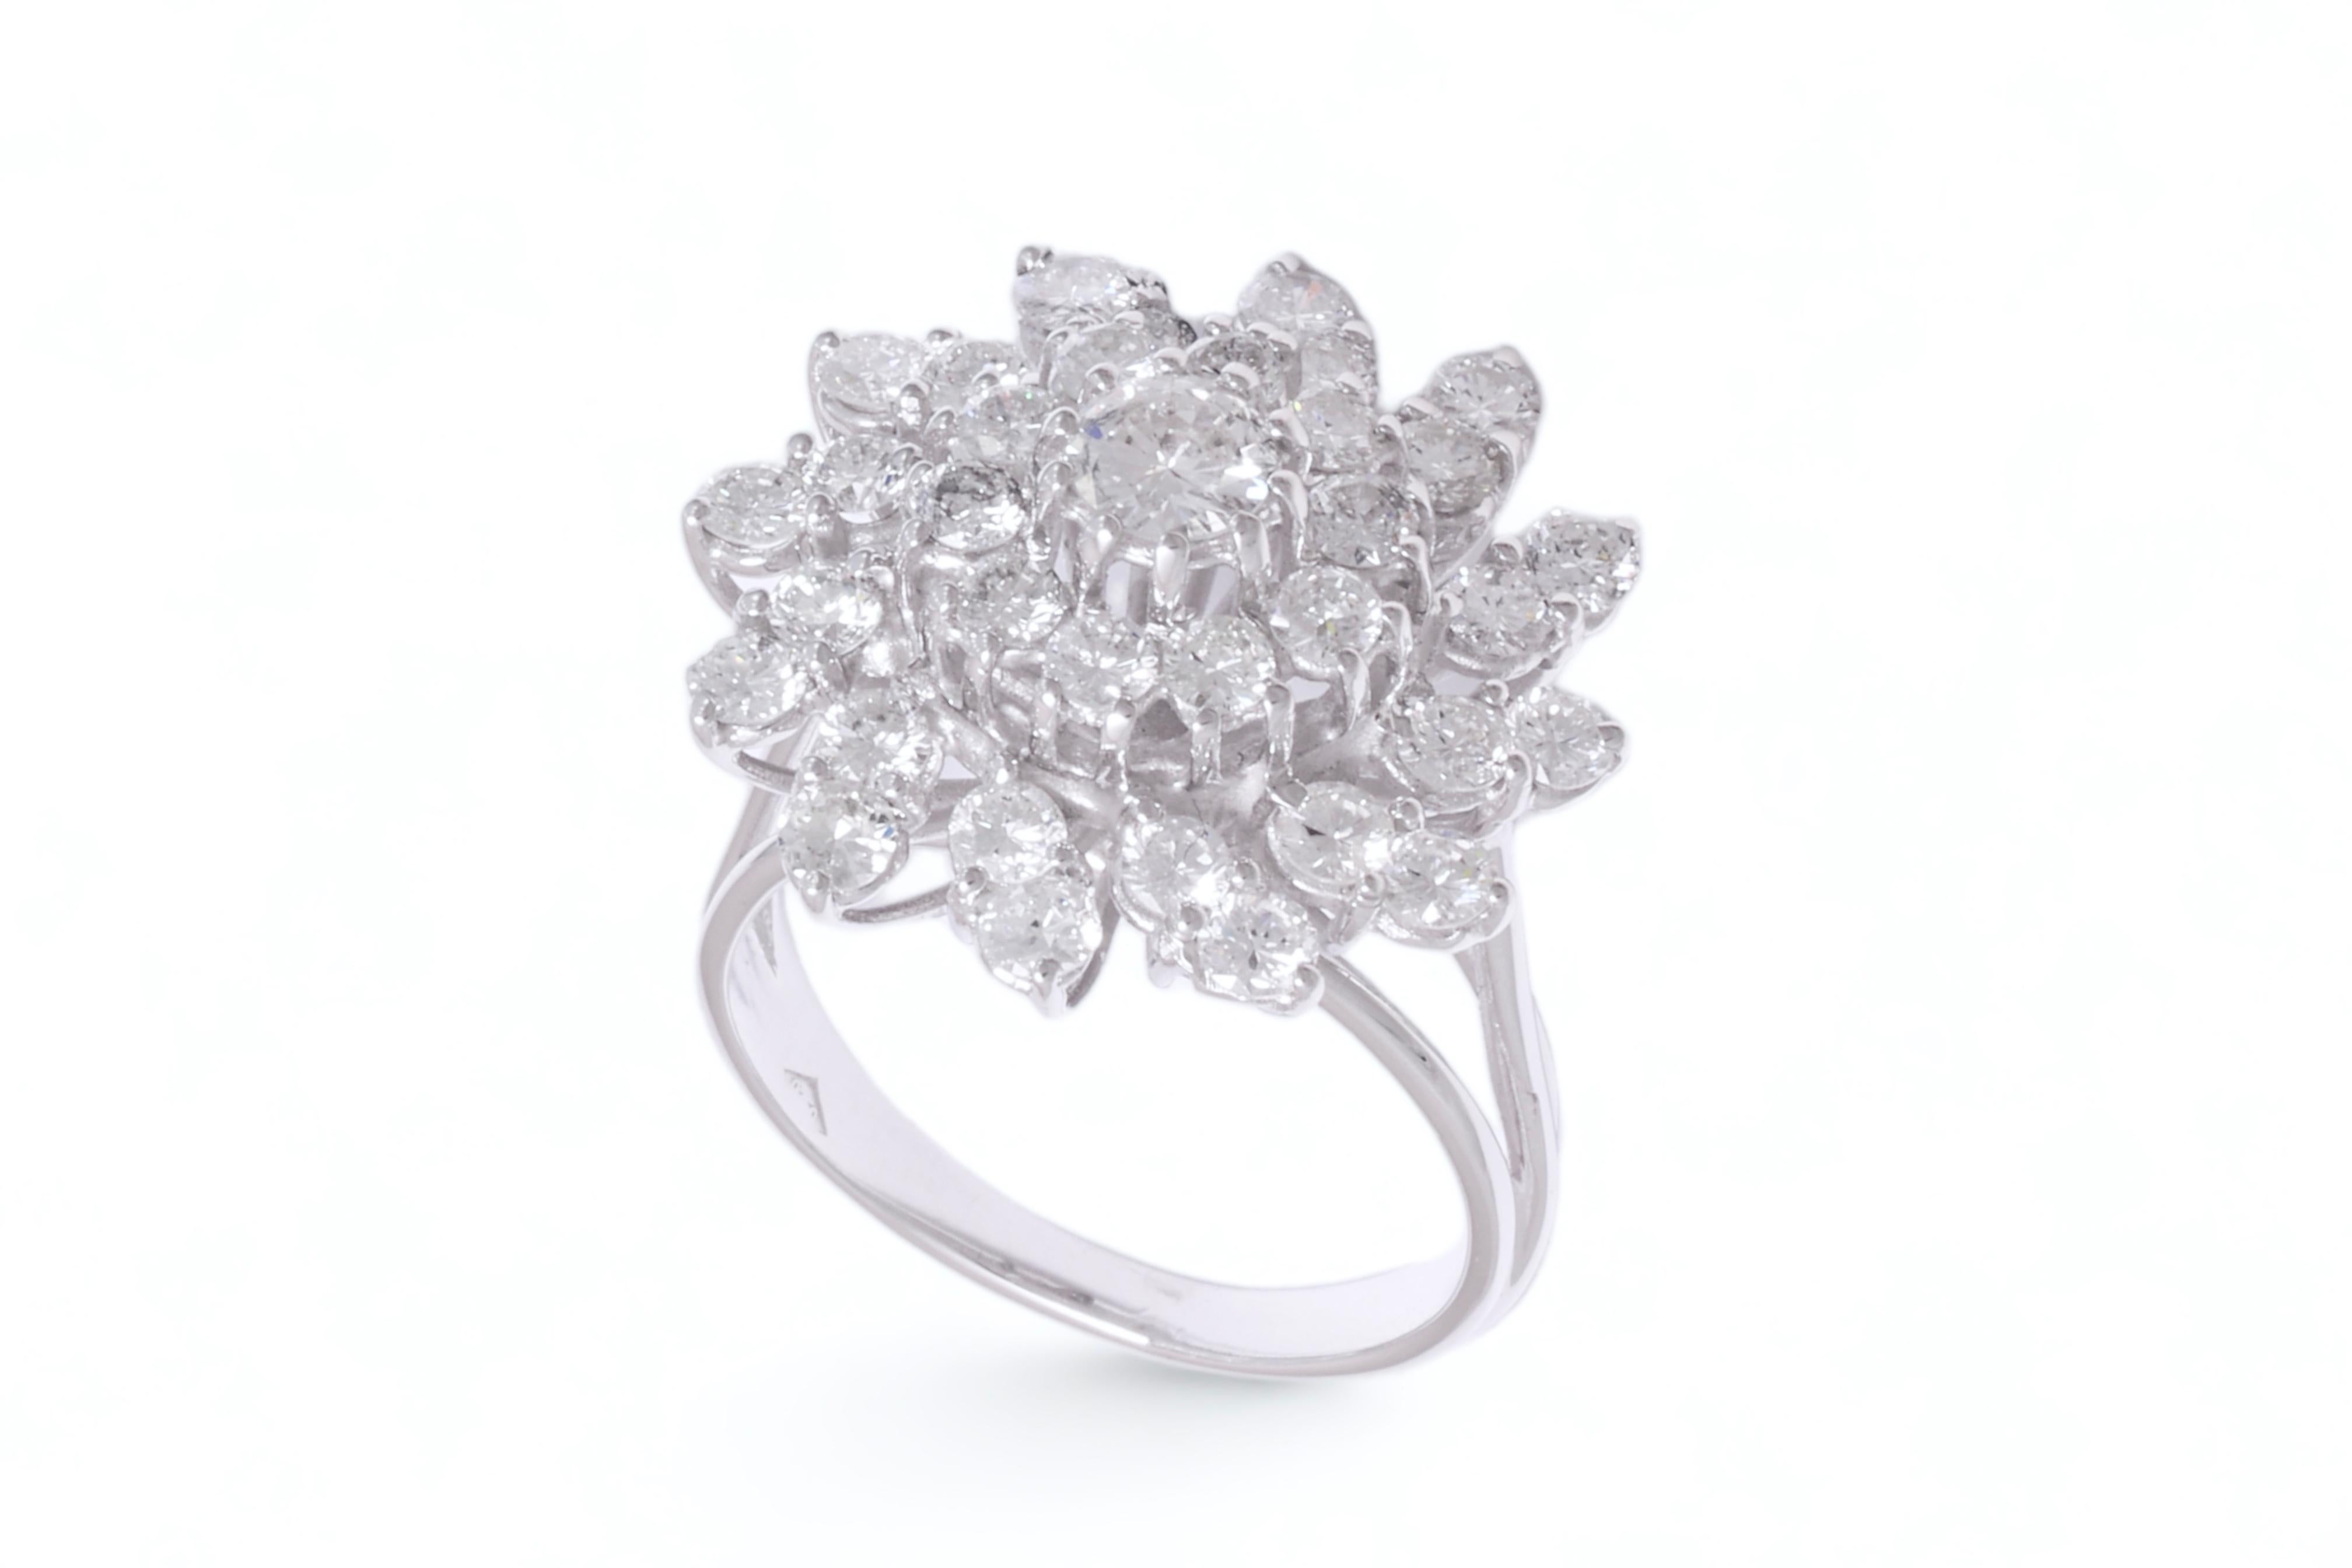 18 kt. White Gold Flower Ring  With 2.85 ct. Diamonds  For Sale 2